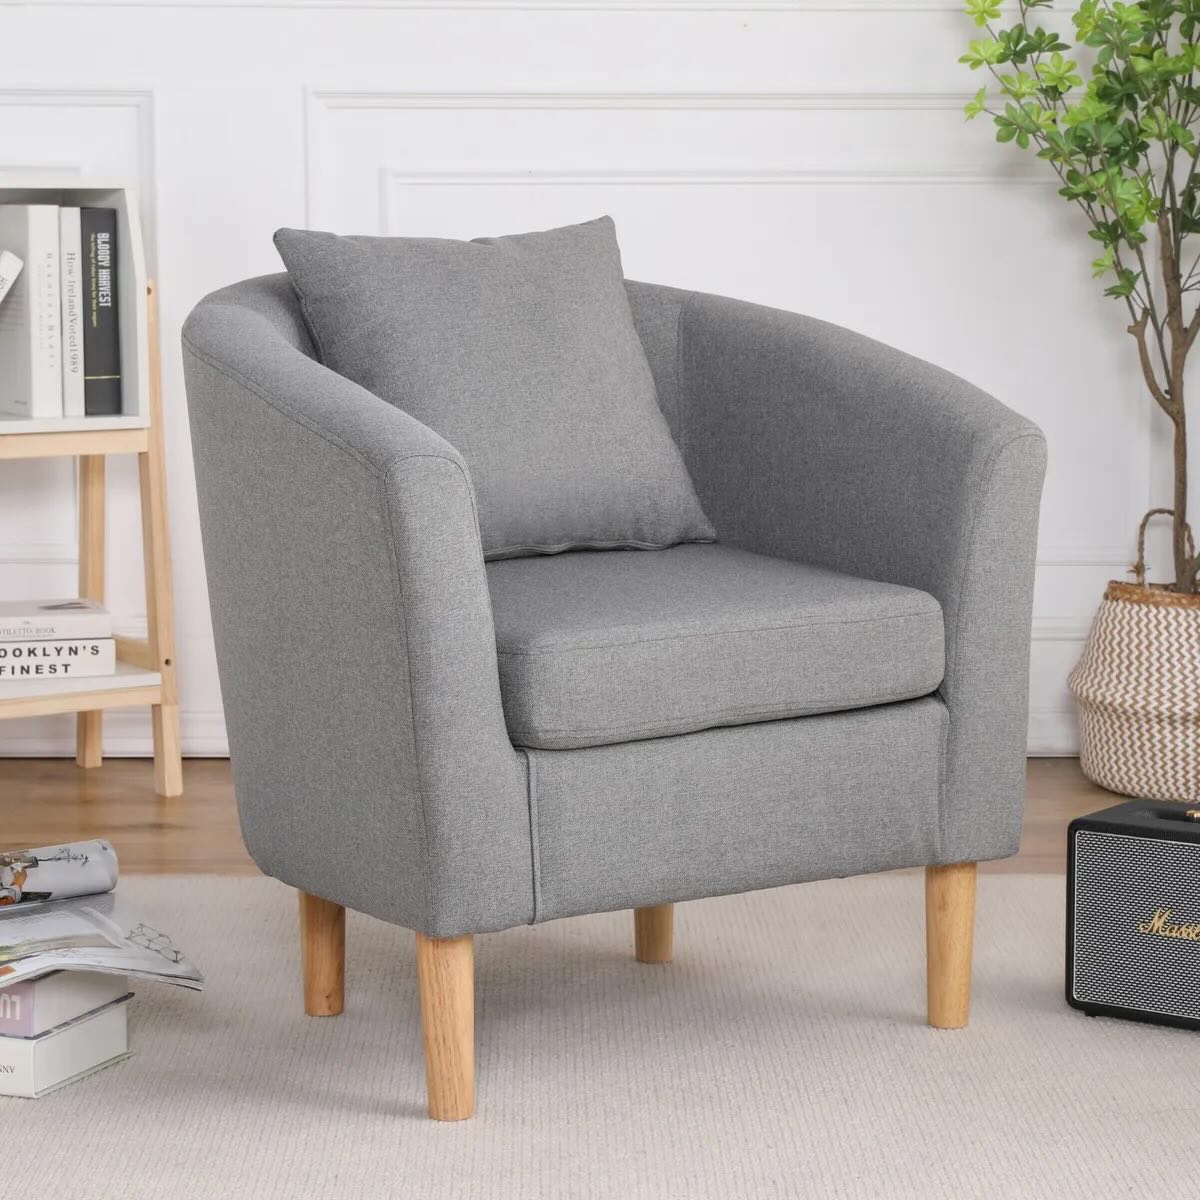 How To Clean Armchair Fabric